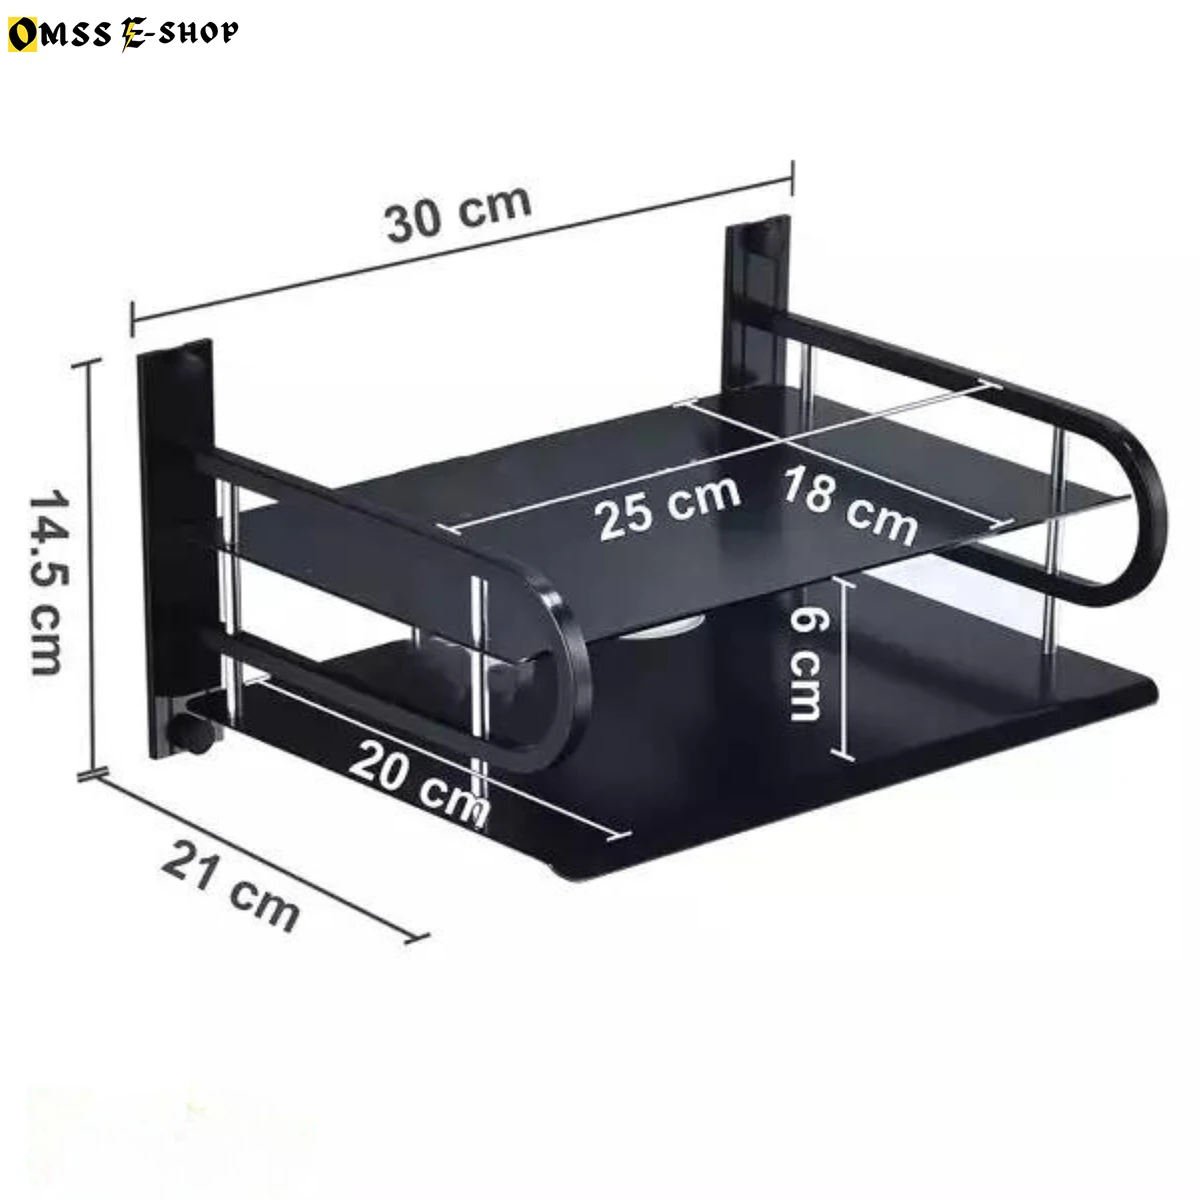 Black Metal Wall Mounted Multilayer Router Stand For Router, Speaker, Projectar, Fiber Modem, DVD players, Blu-ray players, game consoles, satellite TV box, cable TV box, sky box, etc. RP-490DH-RE